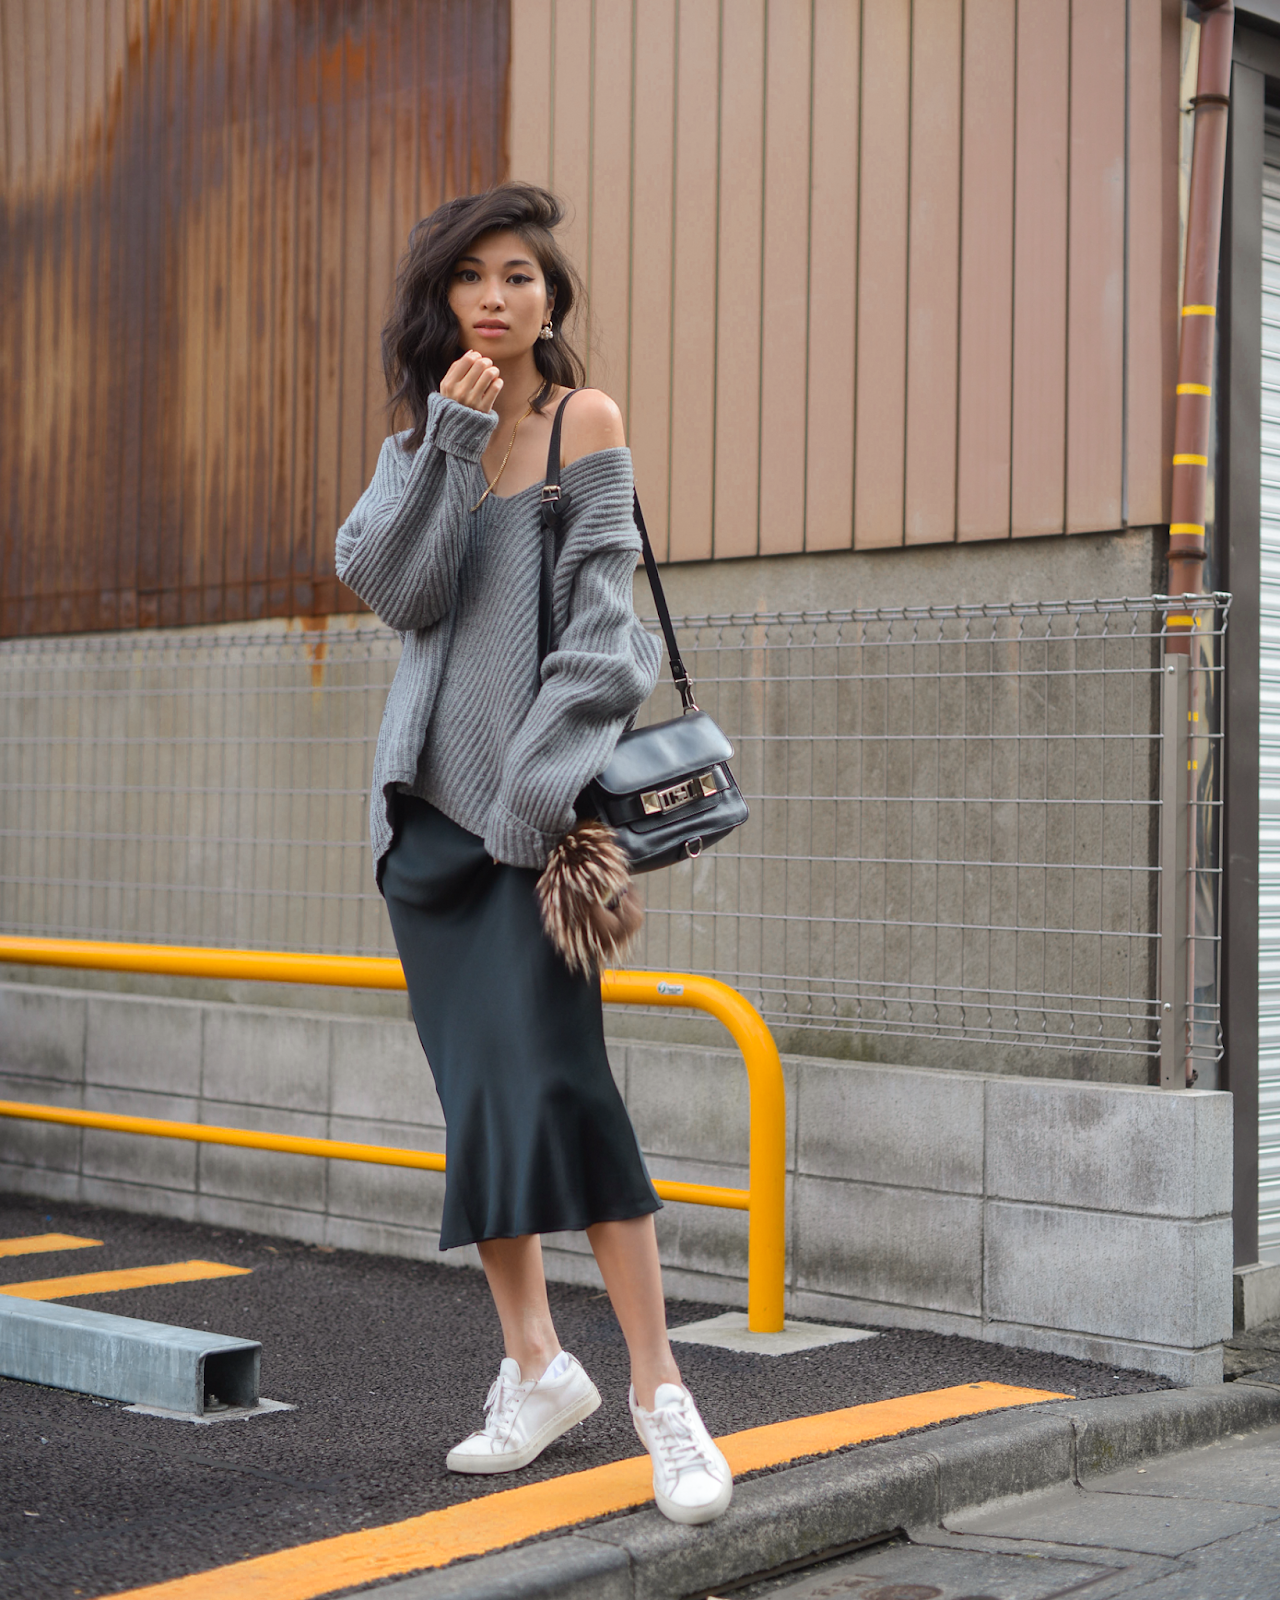 Oversized knit and satin skirt, slip skirt outfit ideas, oversized sweater and silk skirt, fall outfit ideas, Tokyo fall outfit ideas - FOREVERVANNY